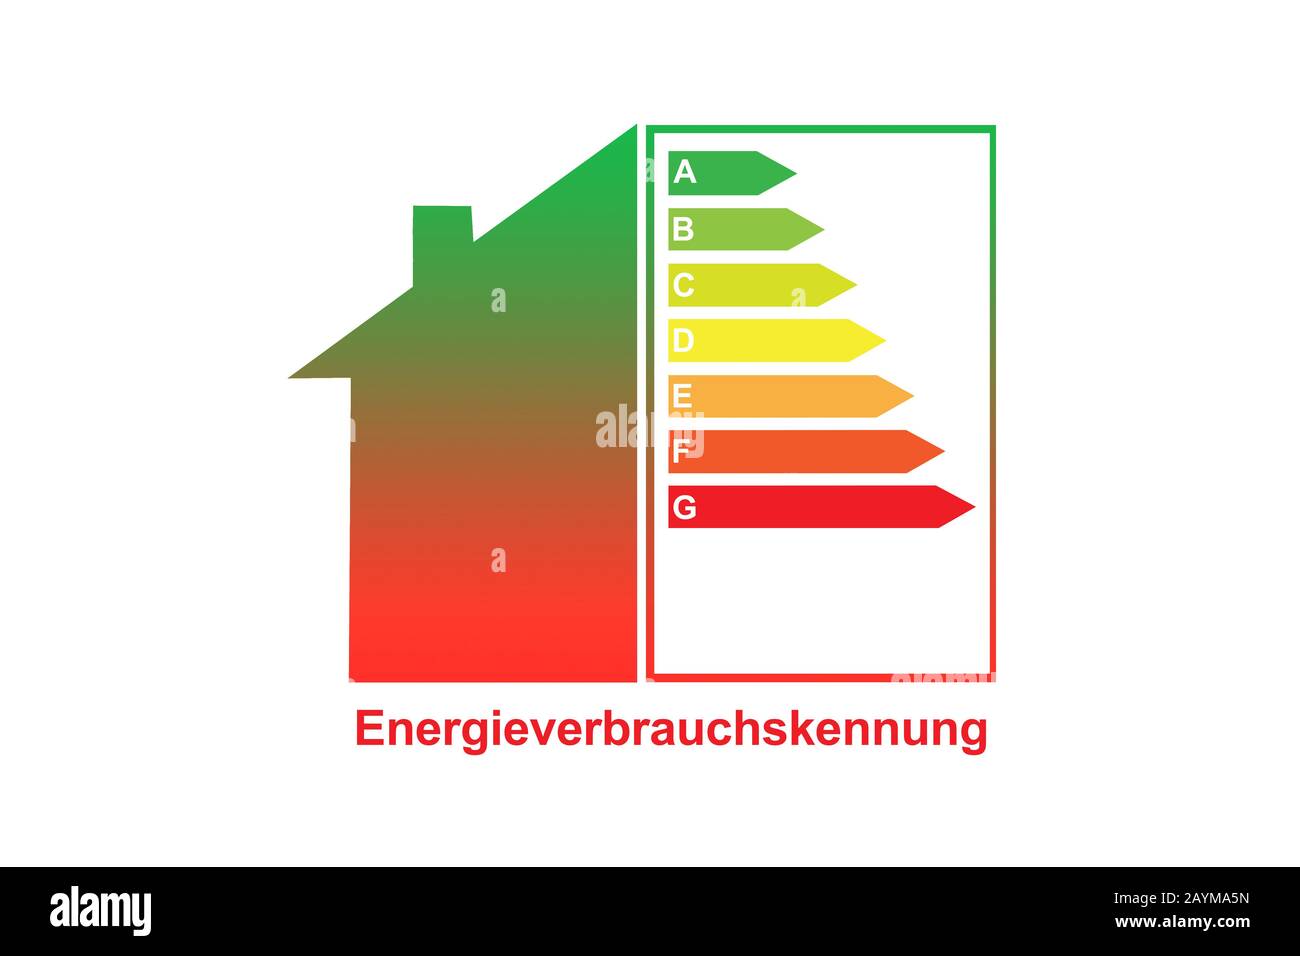 lable of power efficiency lables for a single family house, Germany Stock Photo